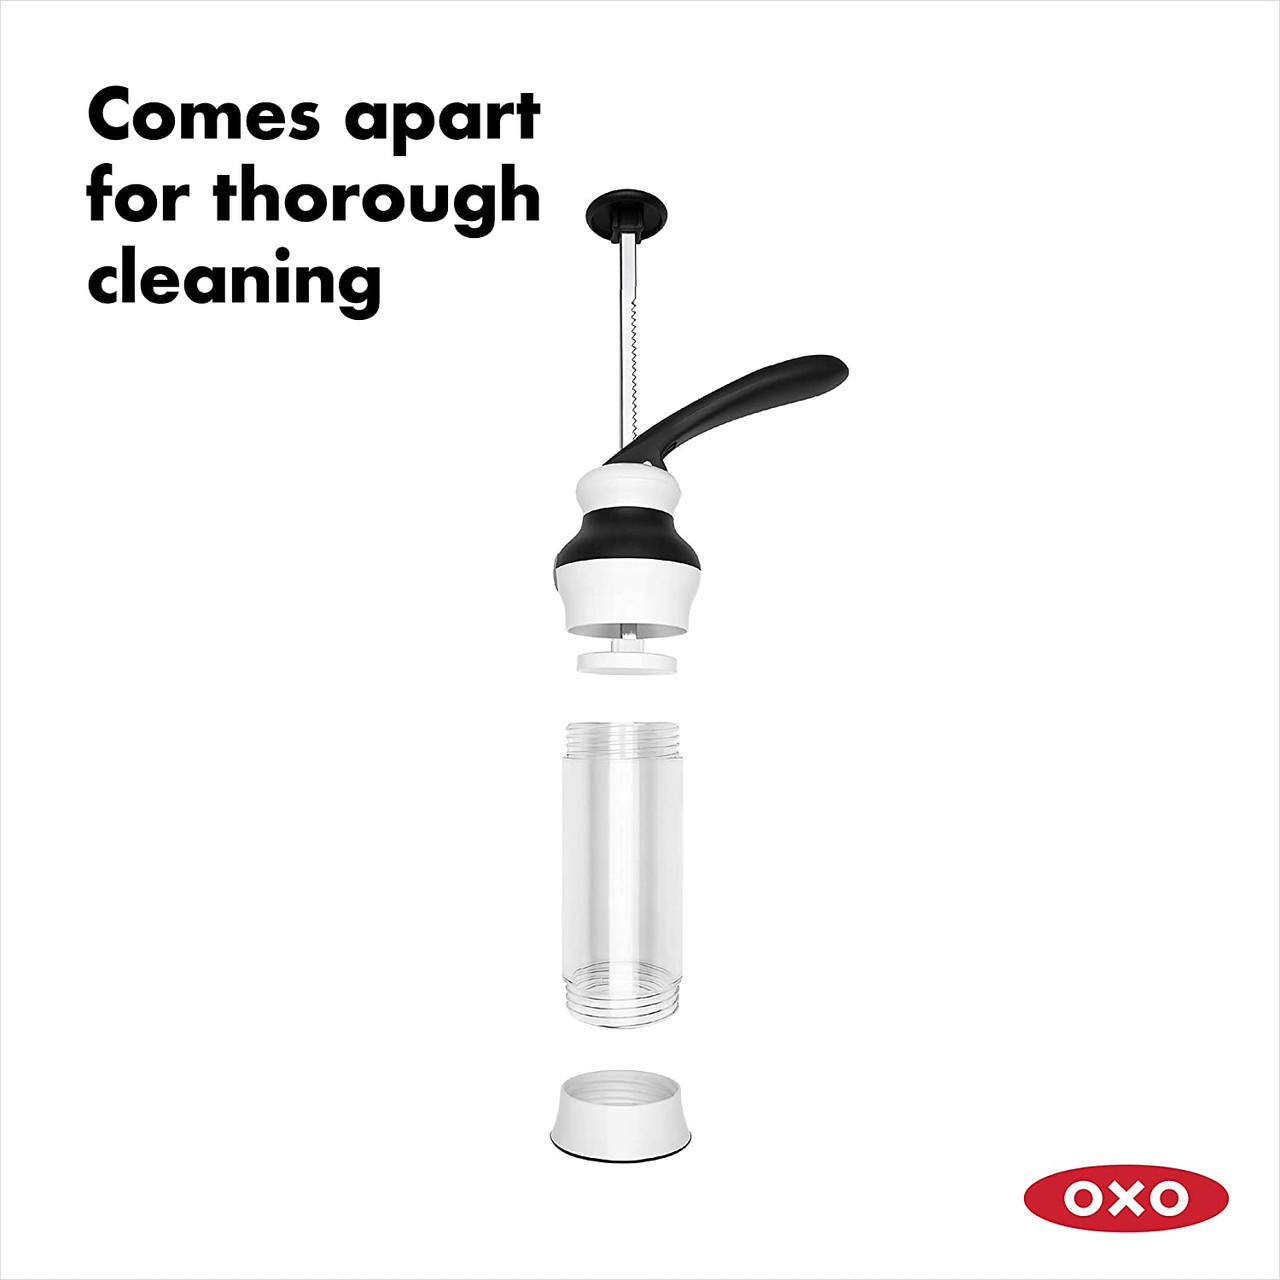 Cooks' Emporium - New OXO products! Got an alternative brand Cookie Press  so we don't run out of cookie making in the future! And some stainless  steel serving utensils with the Good